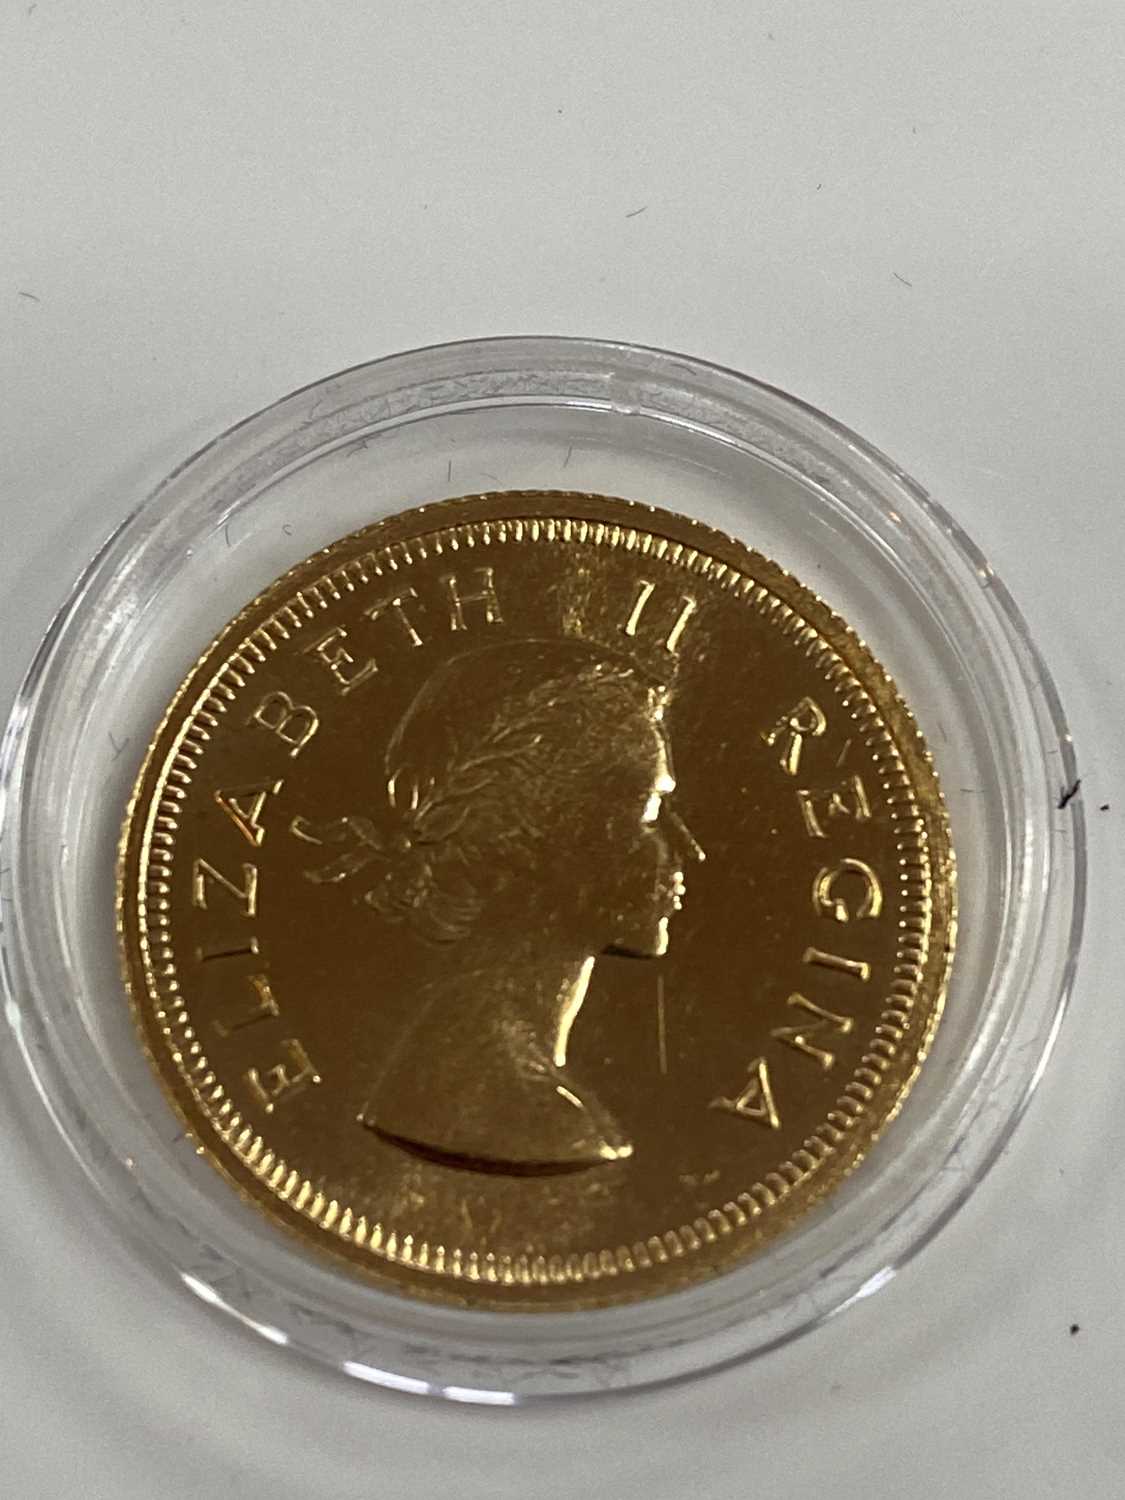 SOUTH AFRICA GOLD £1 COIN 1960 - Image 3 of 4